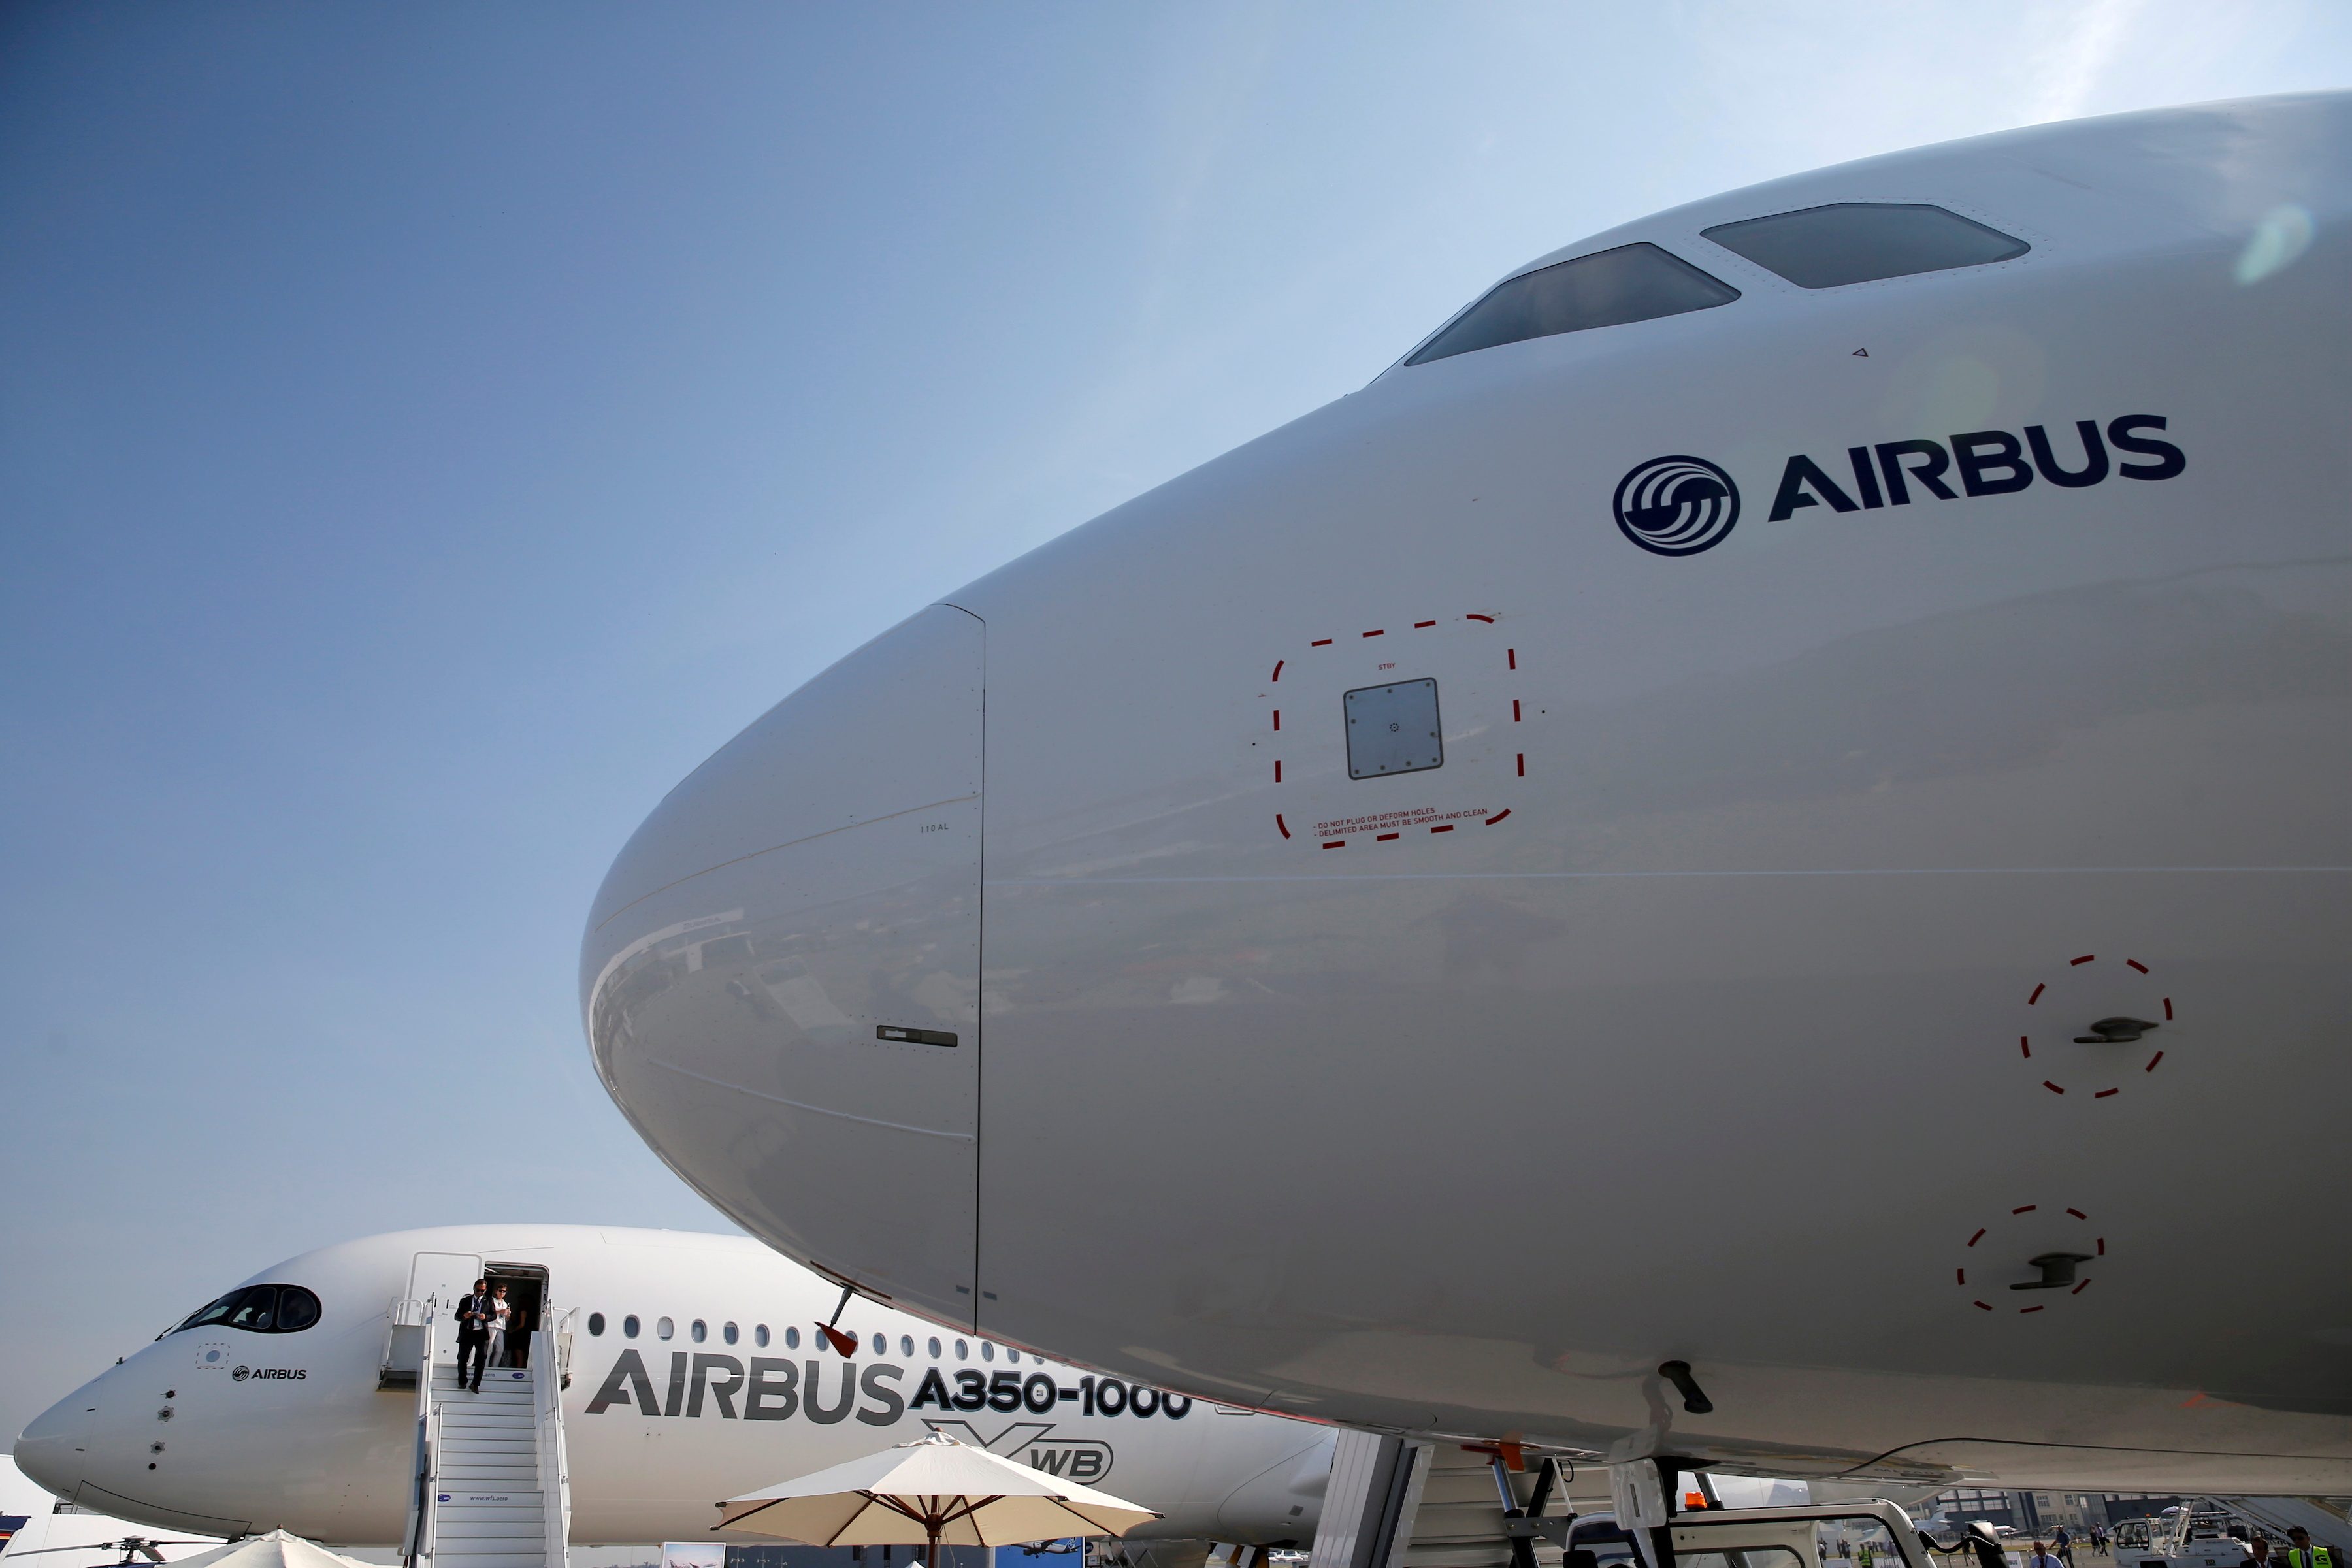 Airbus challenges Boeing cargo dominance with A350 freighter